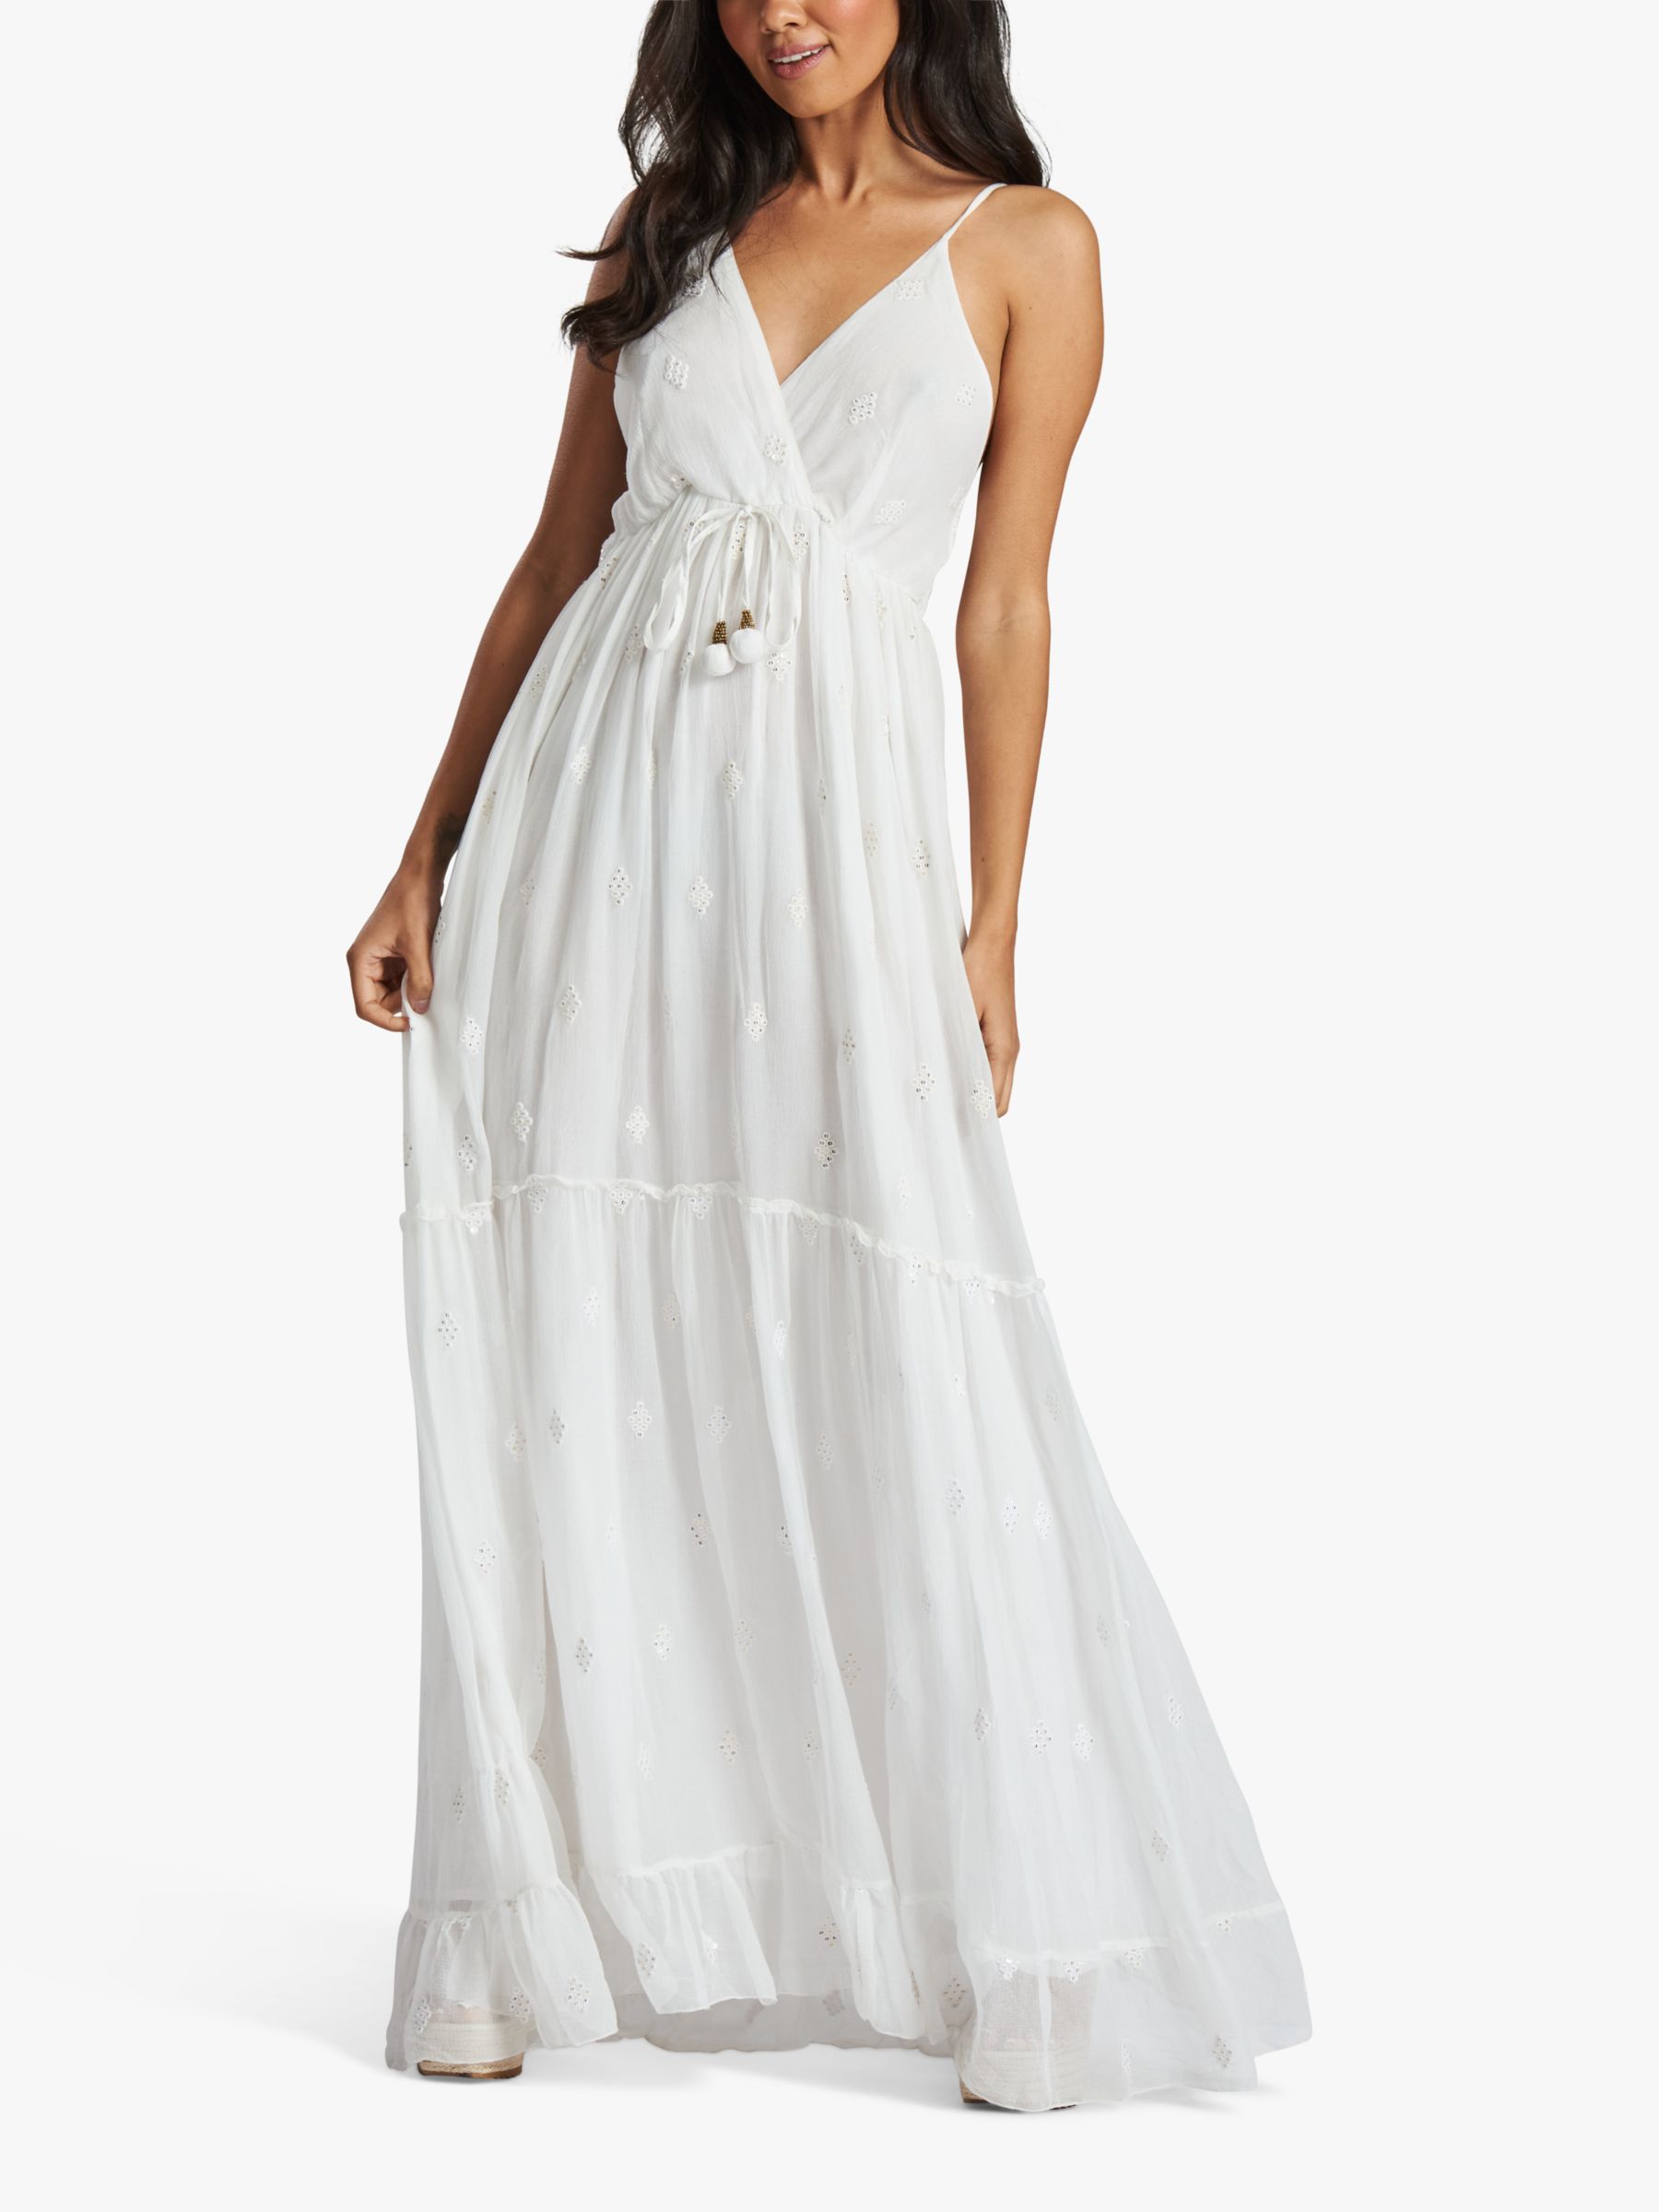 South Beach Sequin Detail Tiered Maxi Dress, White, 8